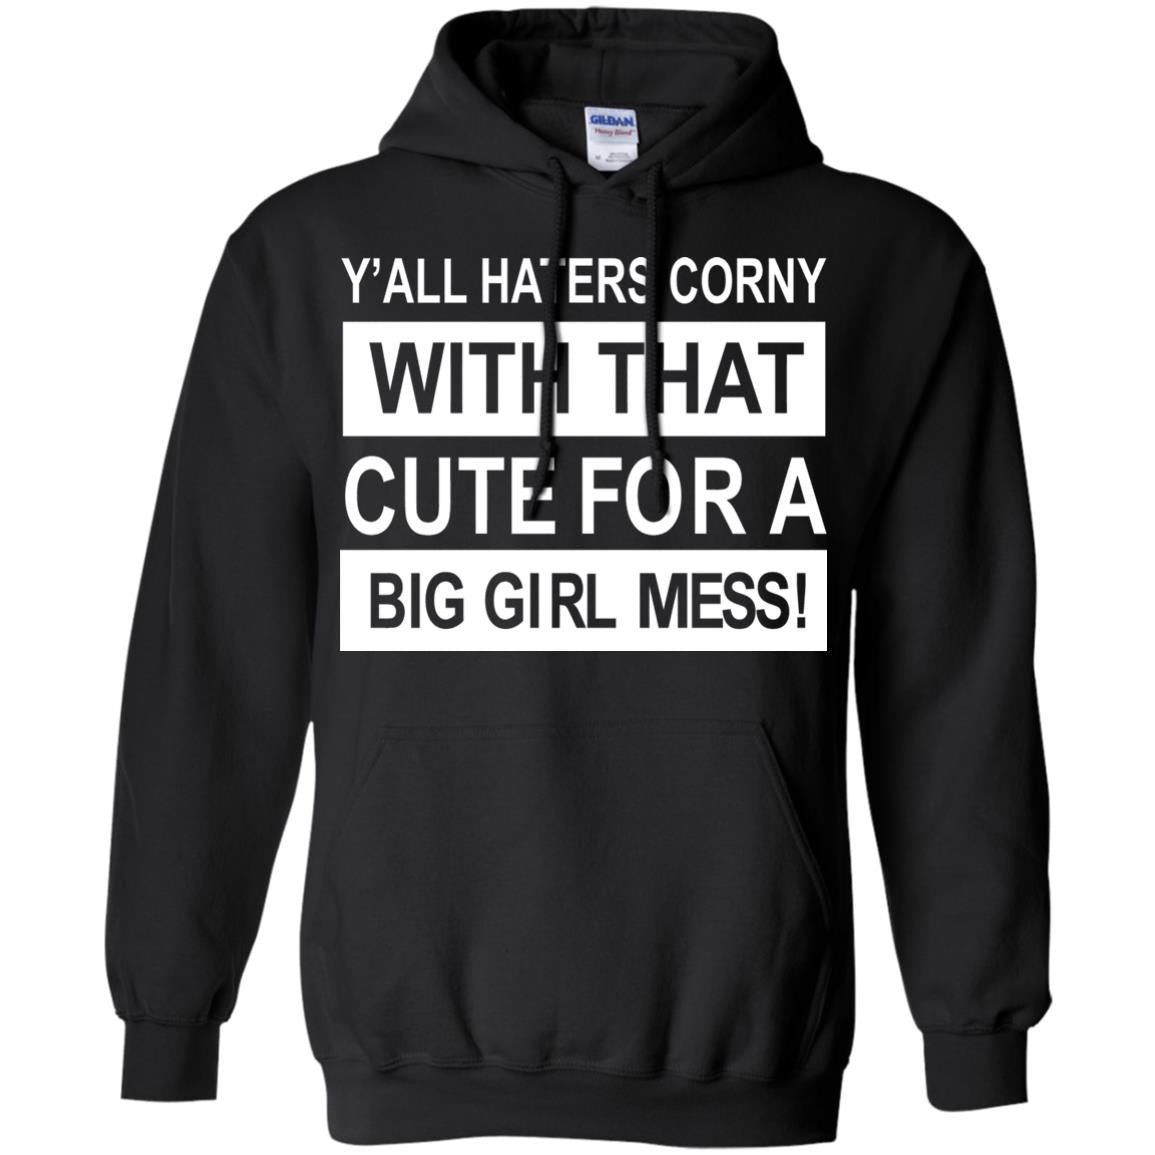 You All Haters Corny With That Cute Fora Big Girl Mess Shirt